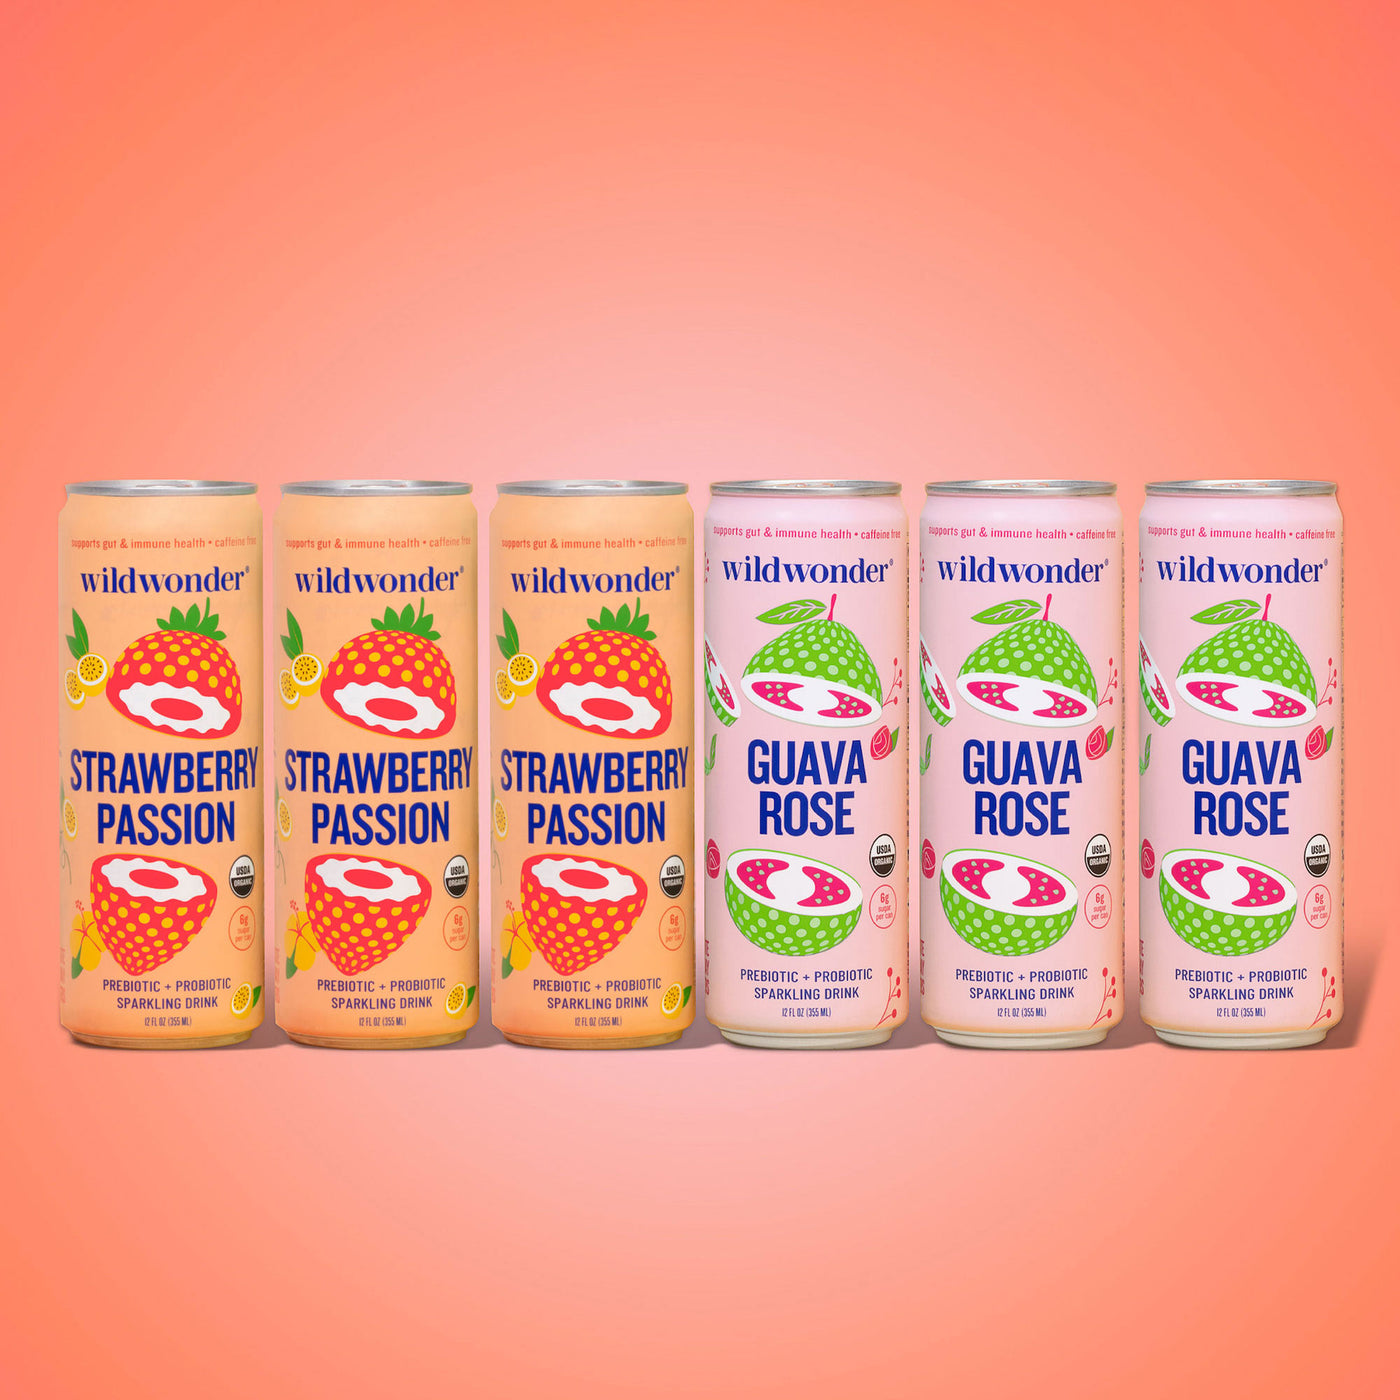 wildwonder Botanical Bouquet Variety Pack - 6 cans of Guava Rose + 6 cans of Strawberry Passion